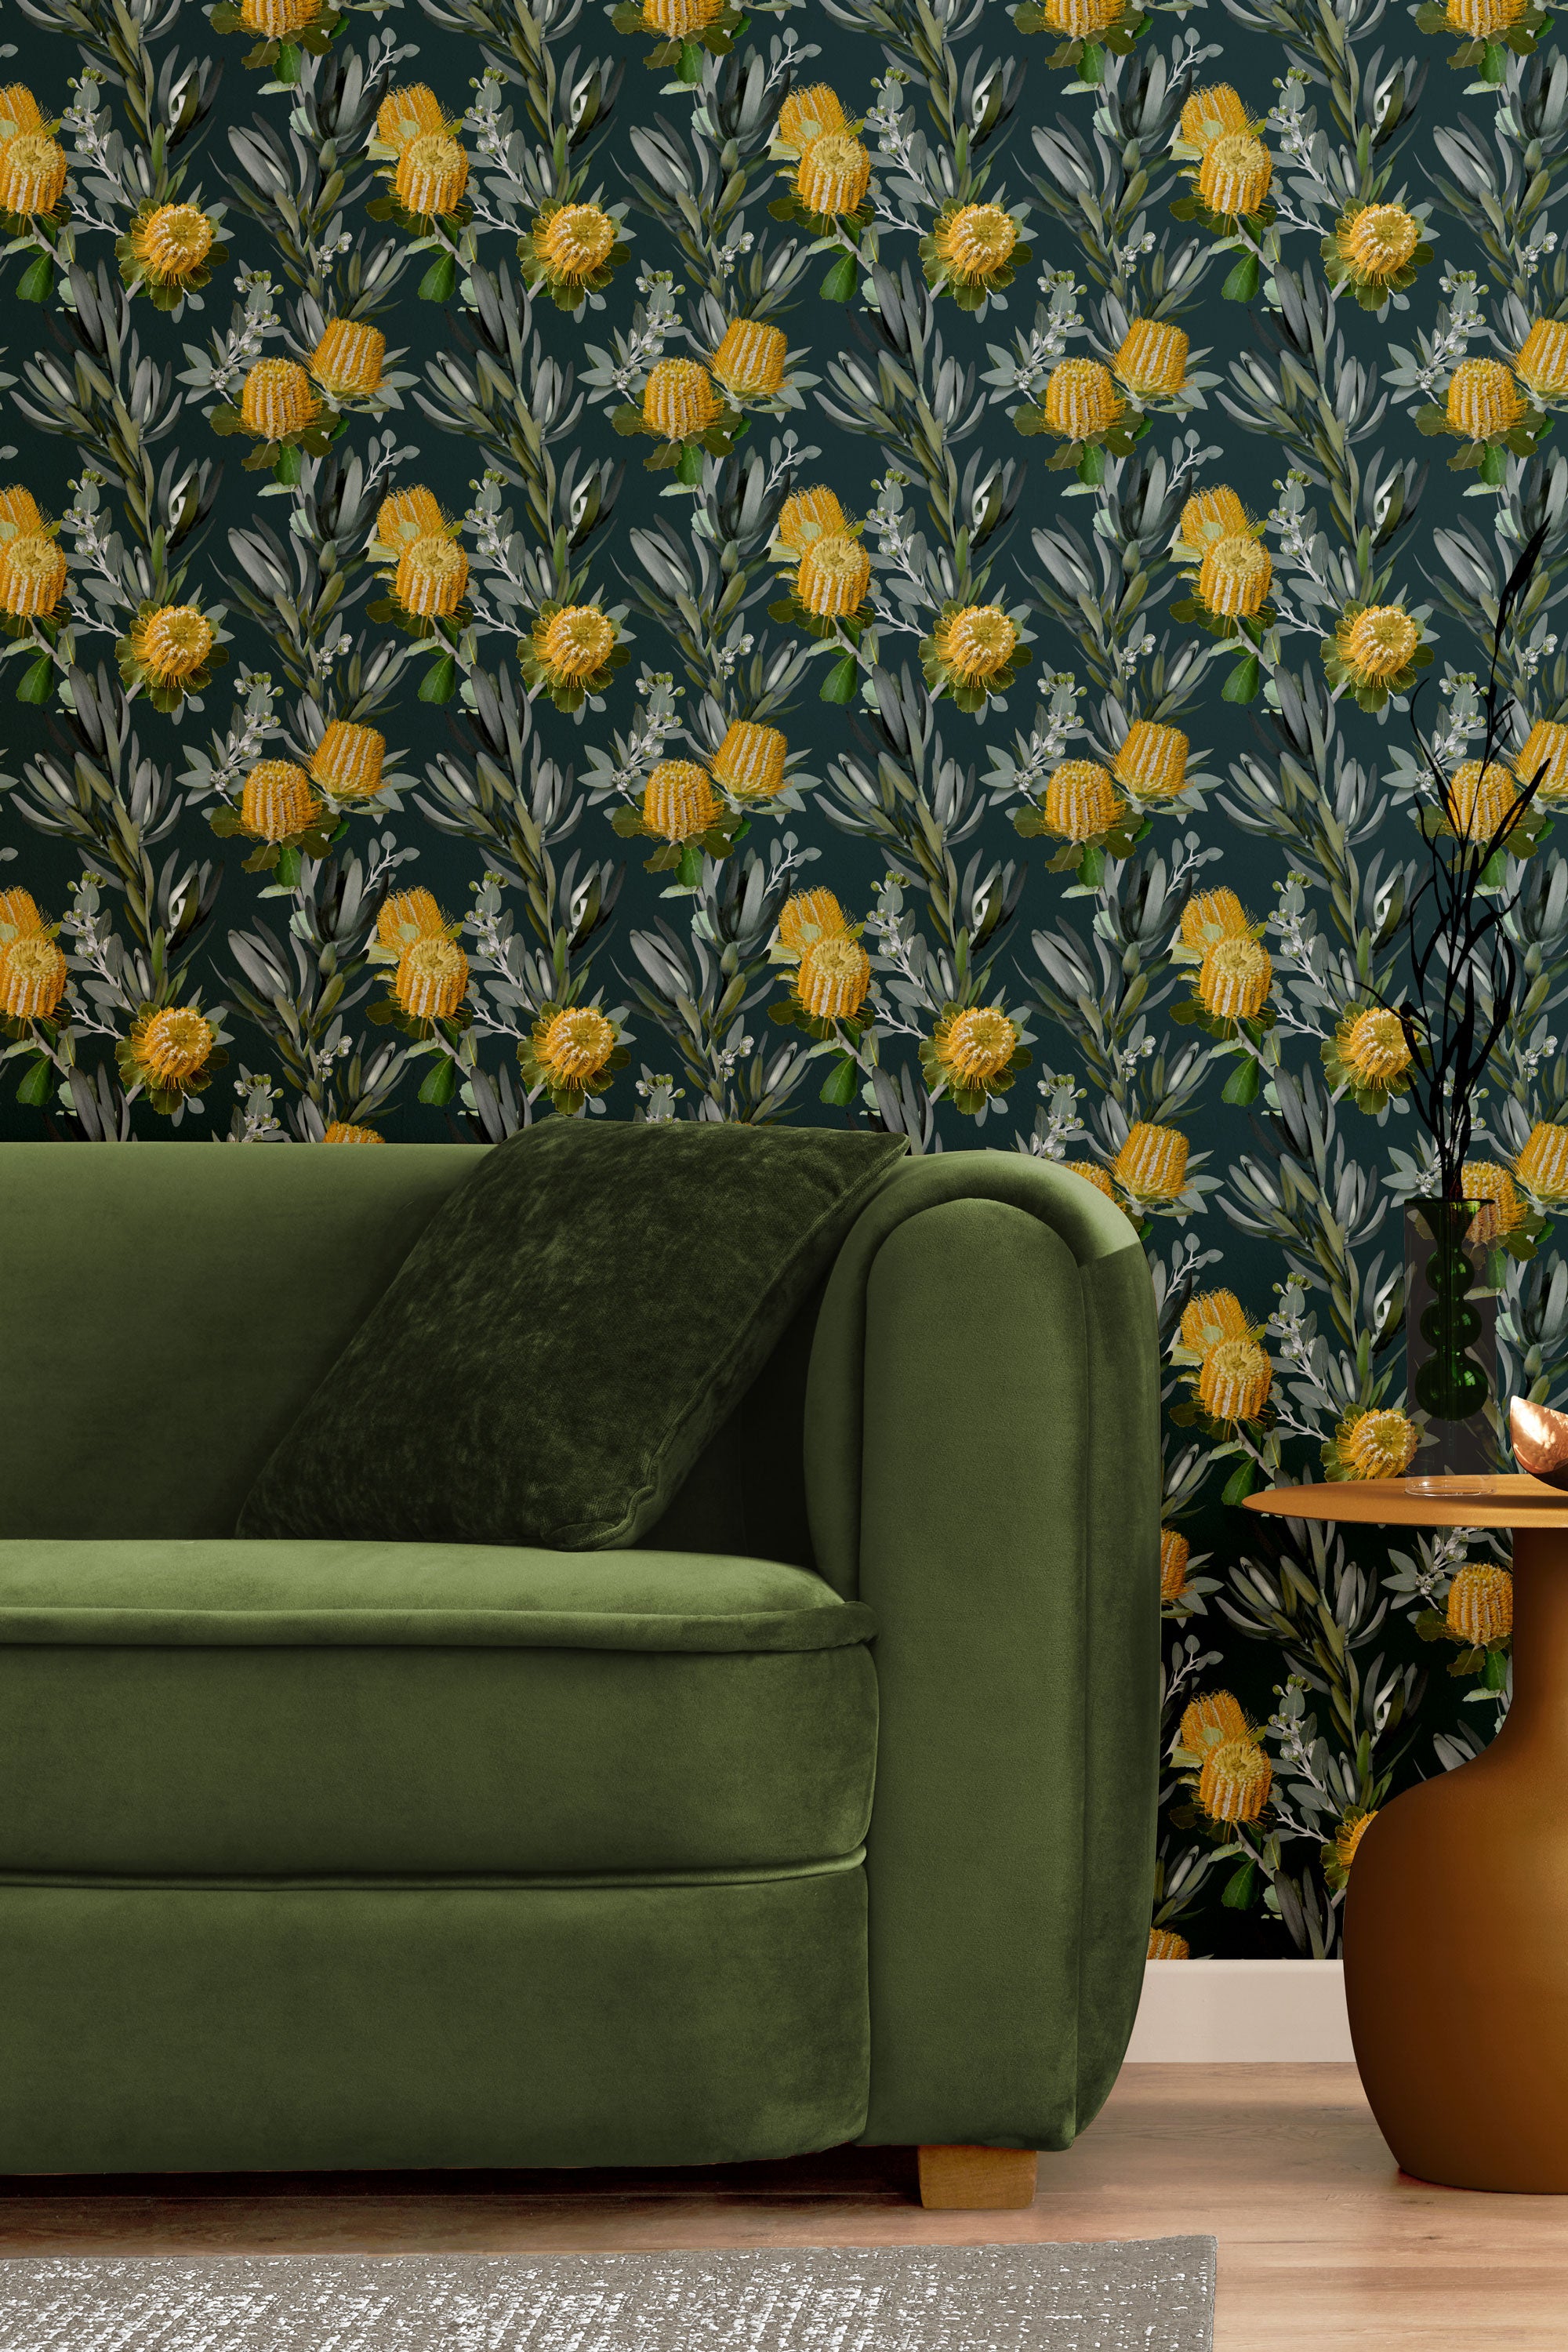 A maximalist living room with a wall papered in a photorealistic floral print in yellow, white, green and navy.